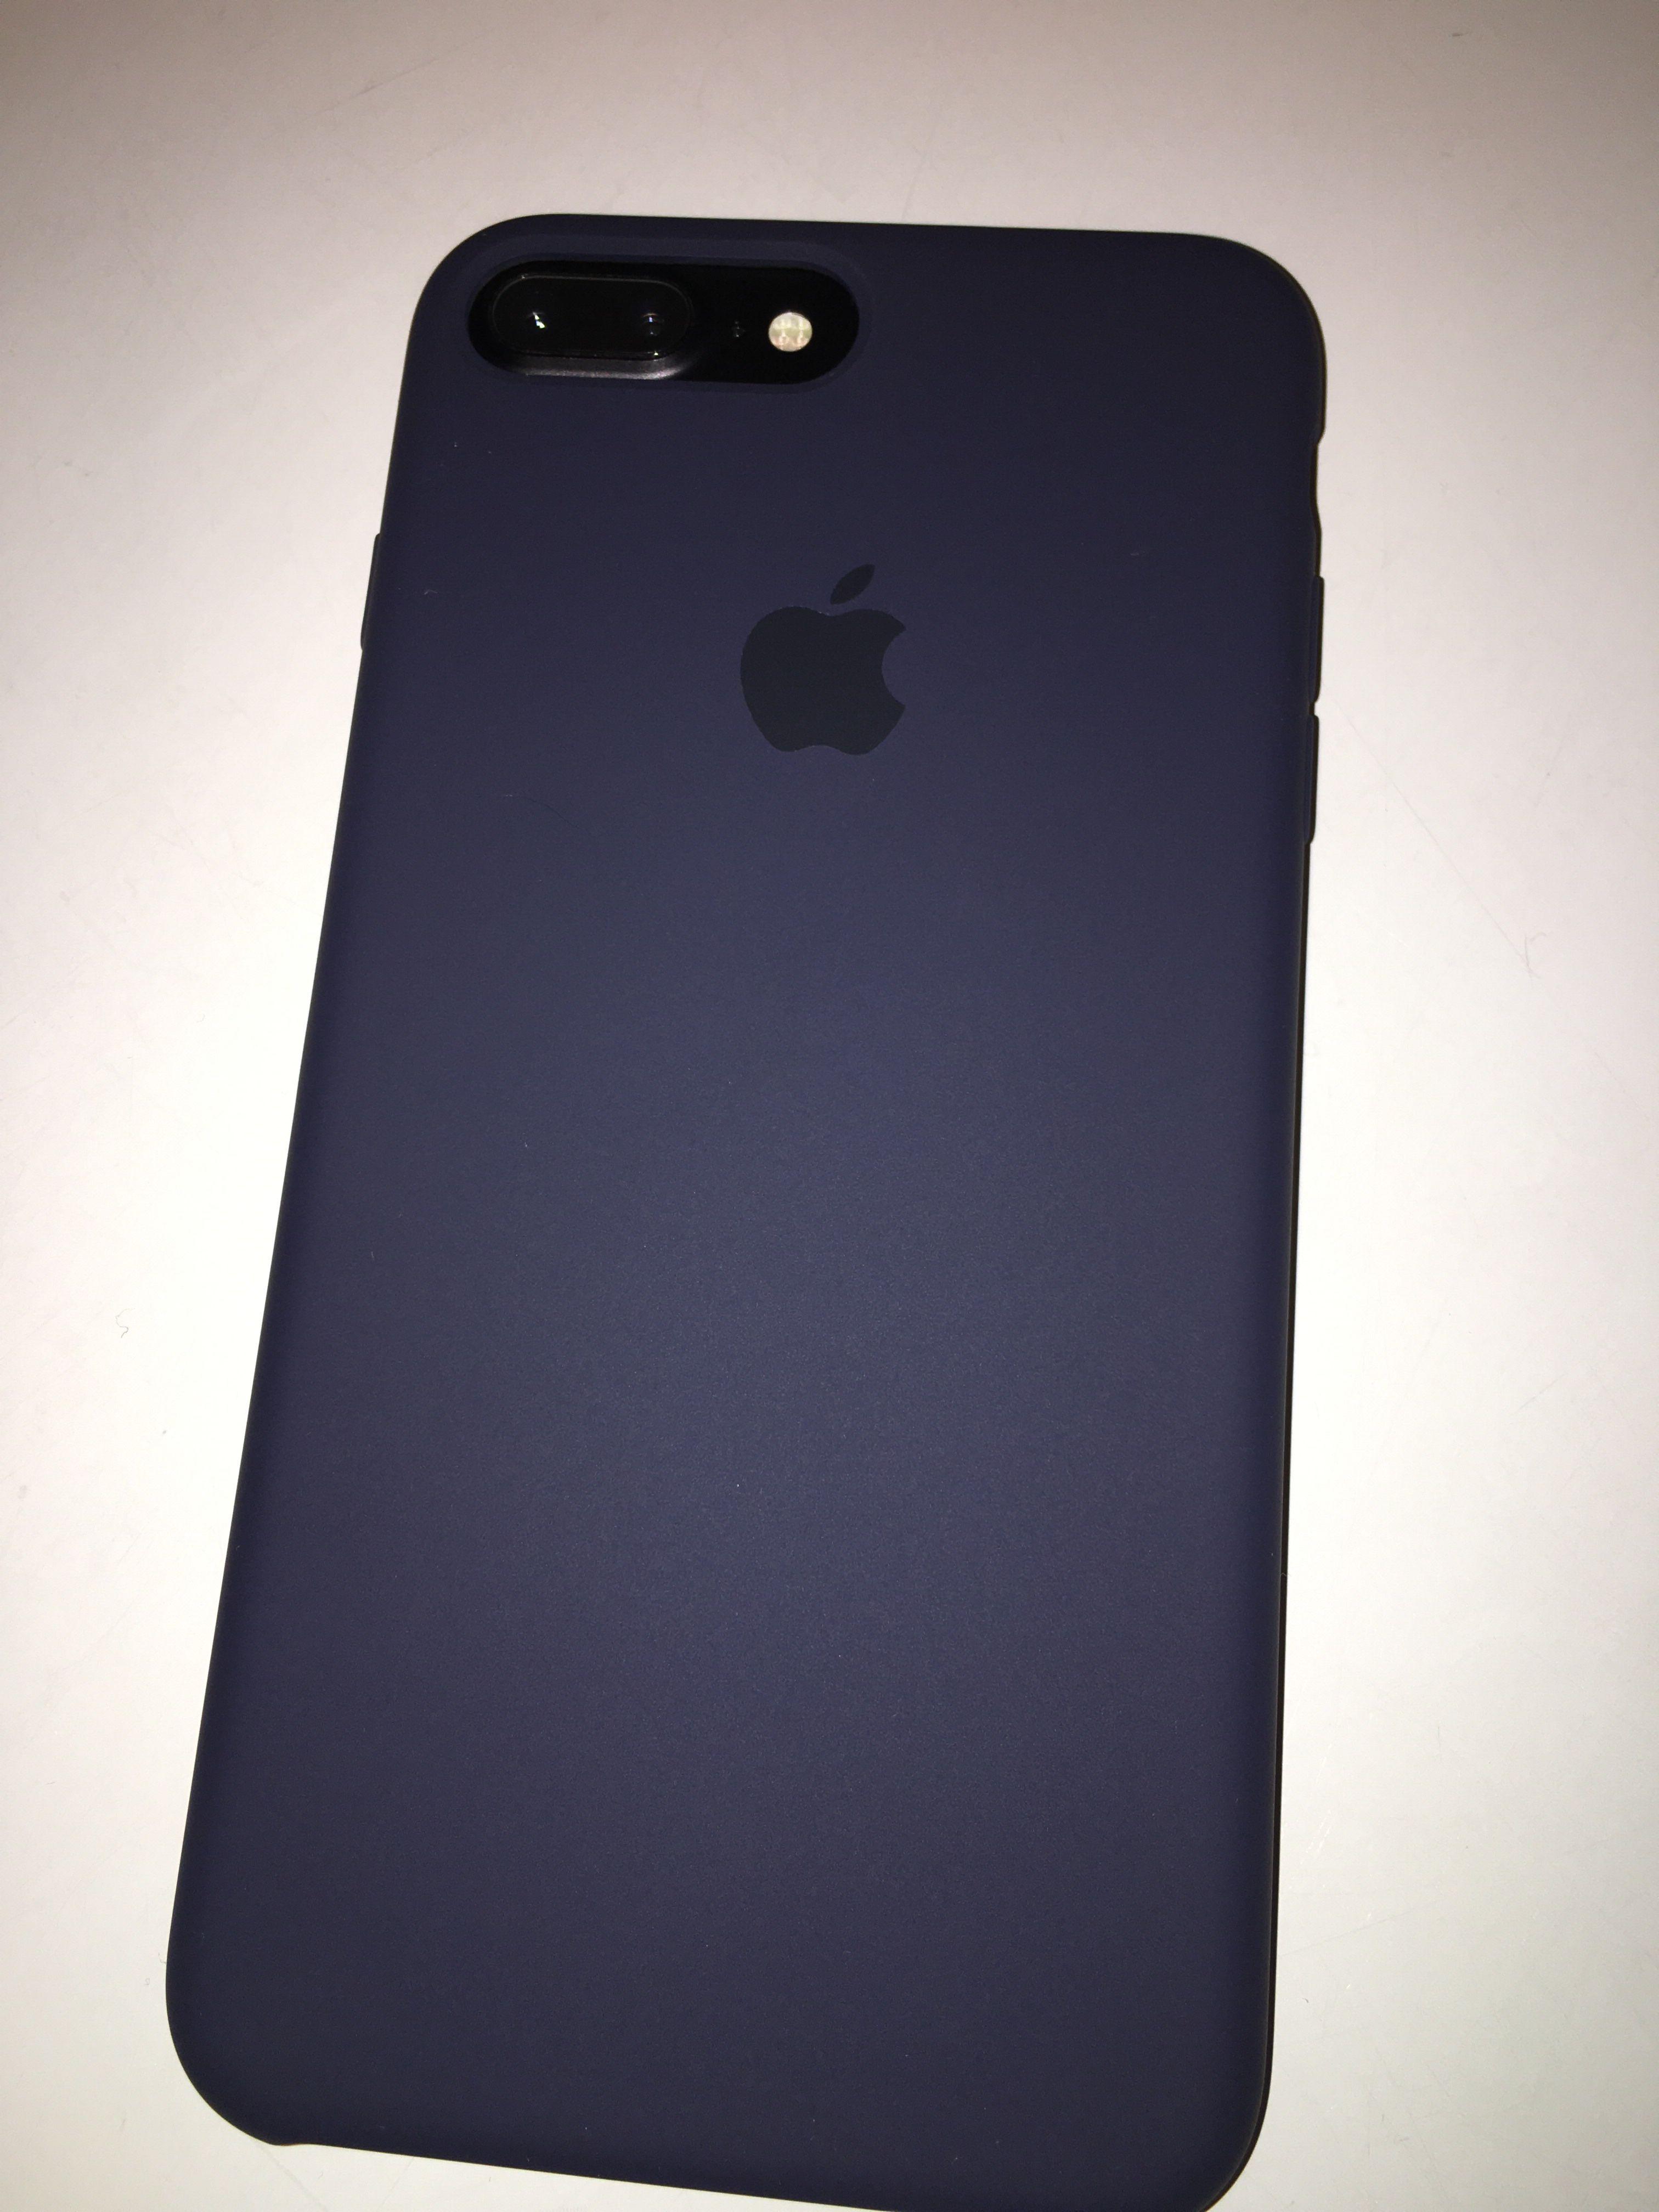 Blueand White Apple Logo - Should i go with the white apple silicone case over the black for my ...